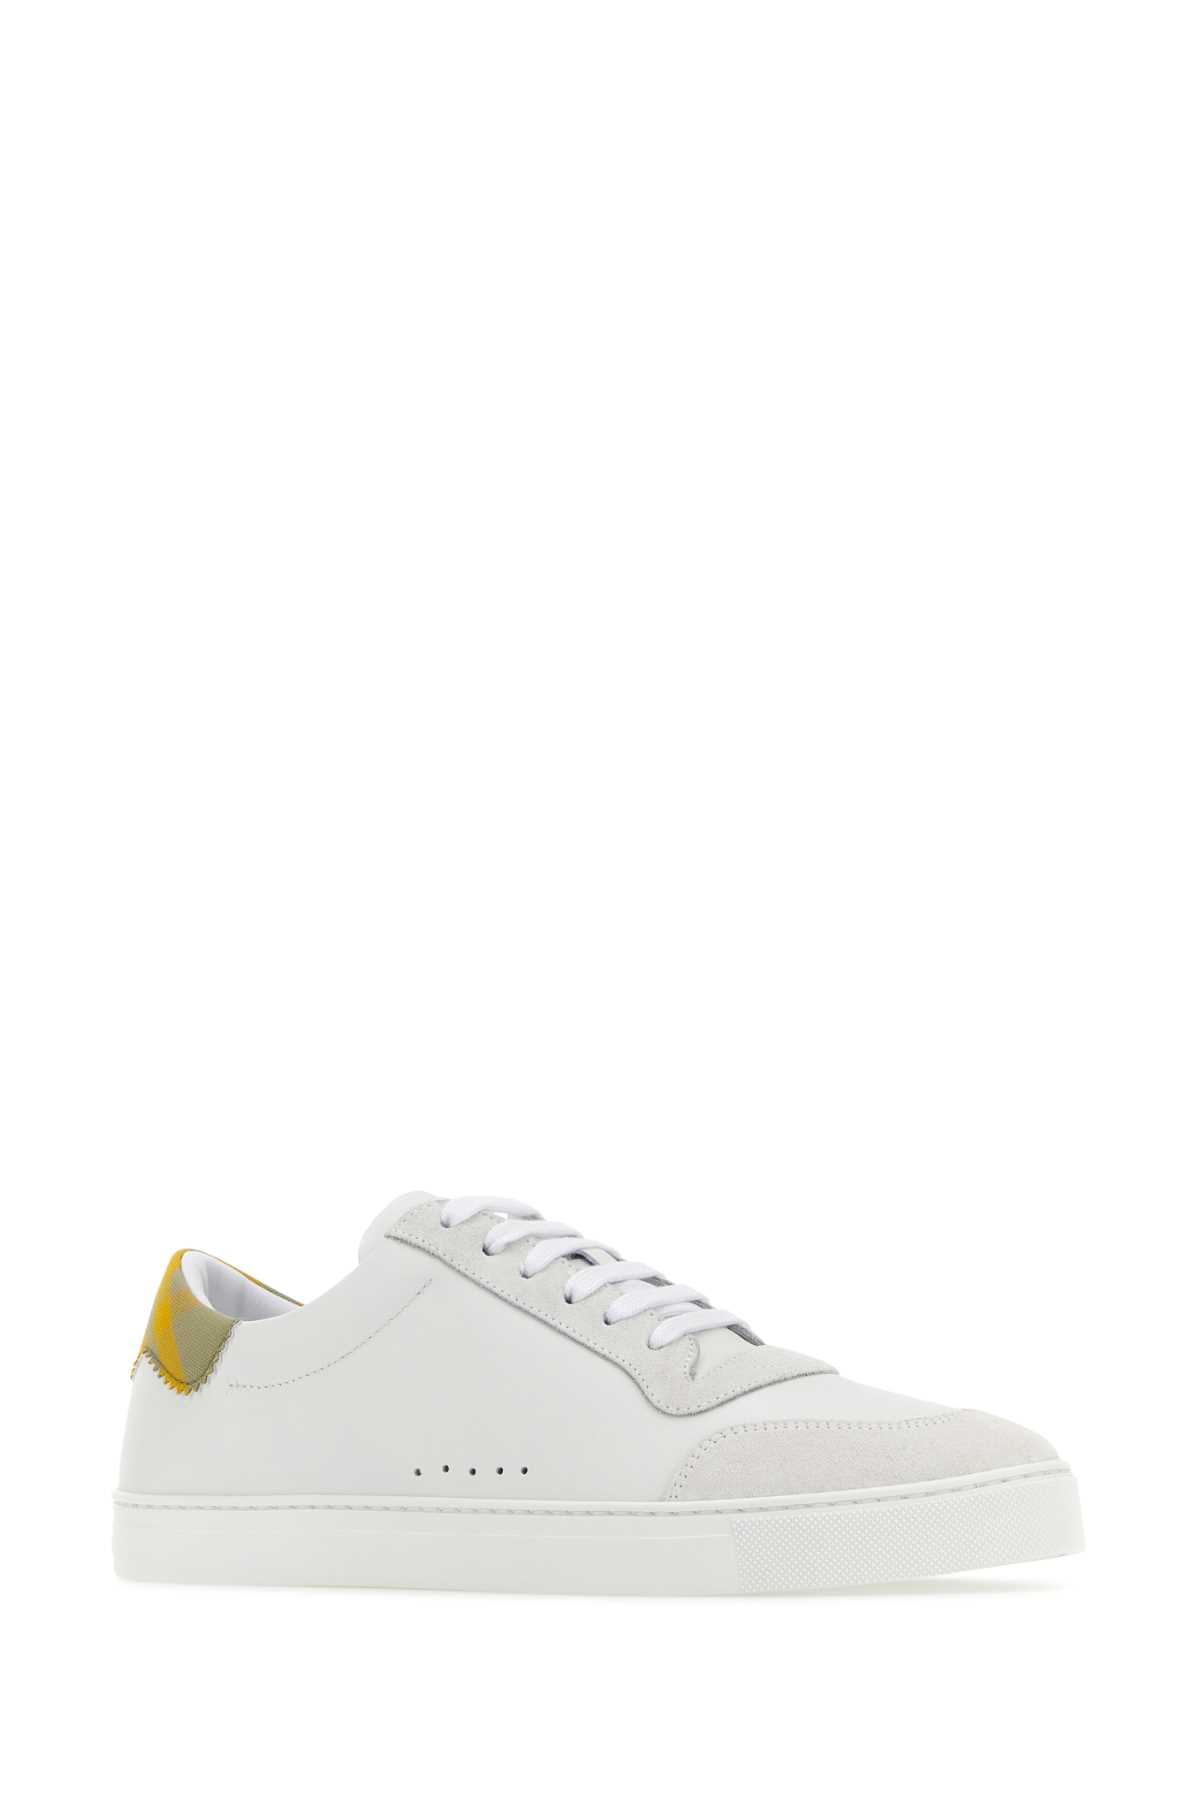 Shop Burberry White Leather Check Sneakers In Opwhthunteripchk